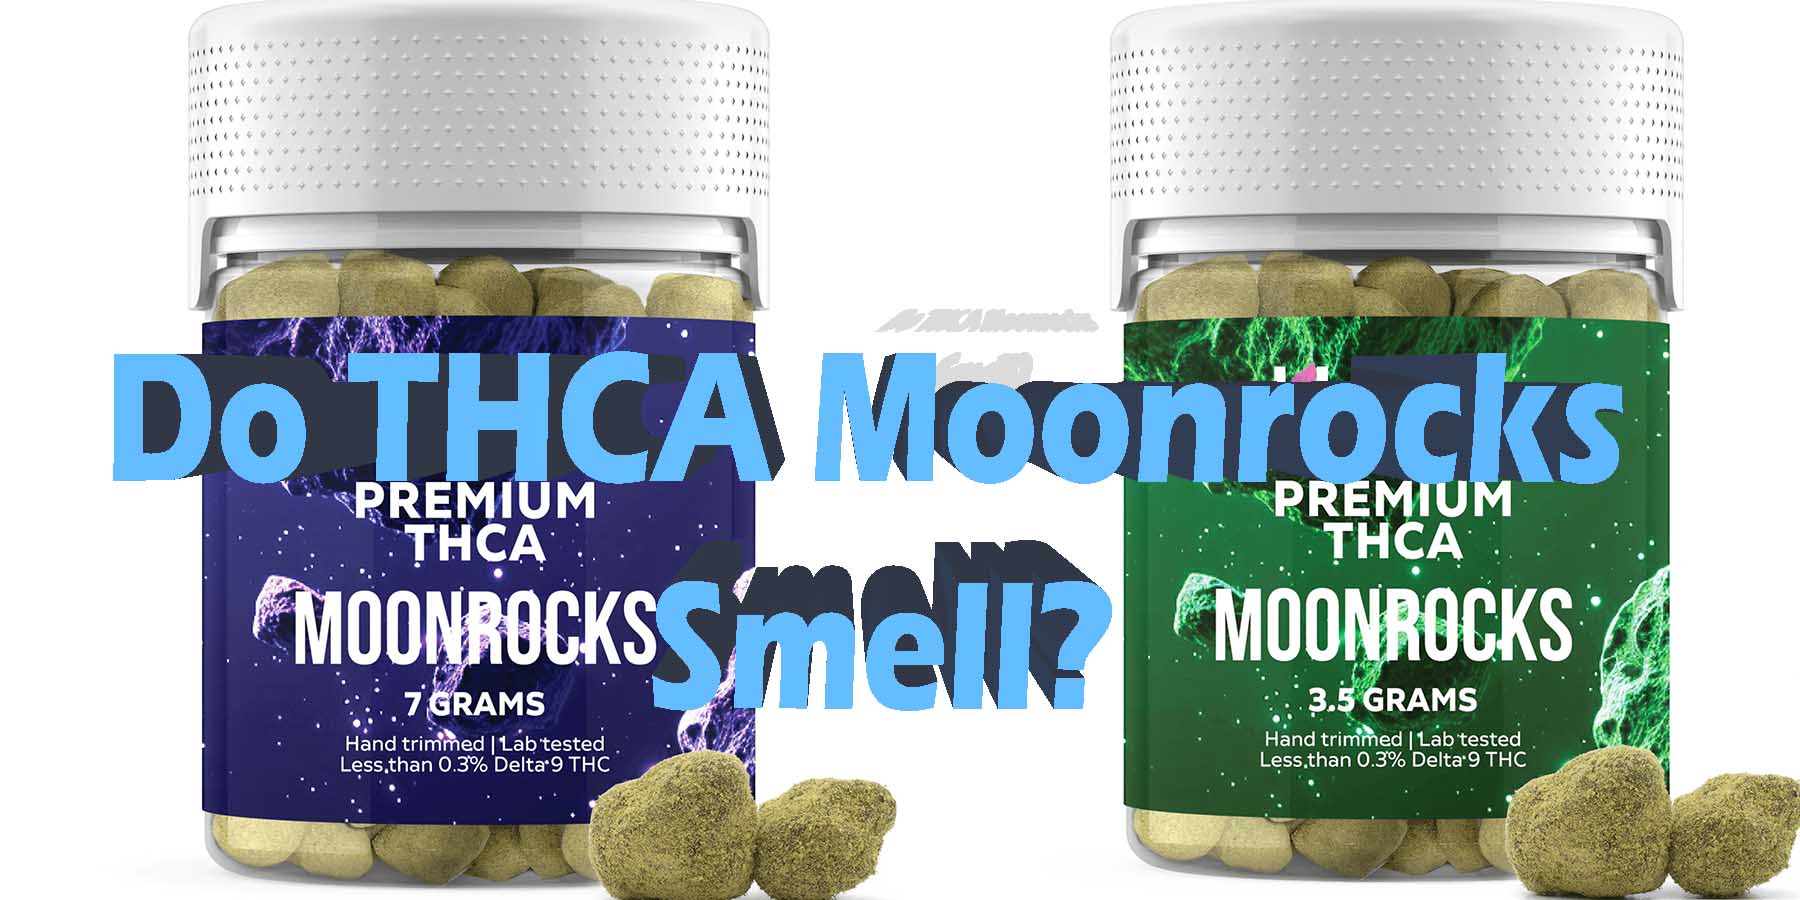 Do THCA Moonrocks Smell Which is Better LowestPrice Coupon Discount For Smoking Best High Smoke Shop Online Near Me Bloomz